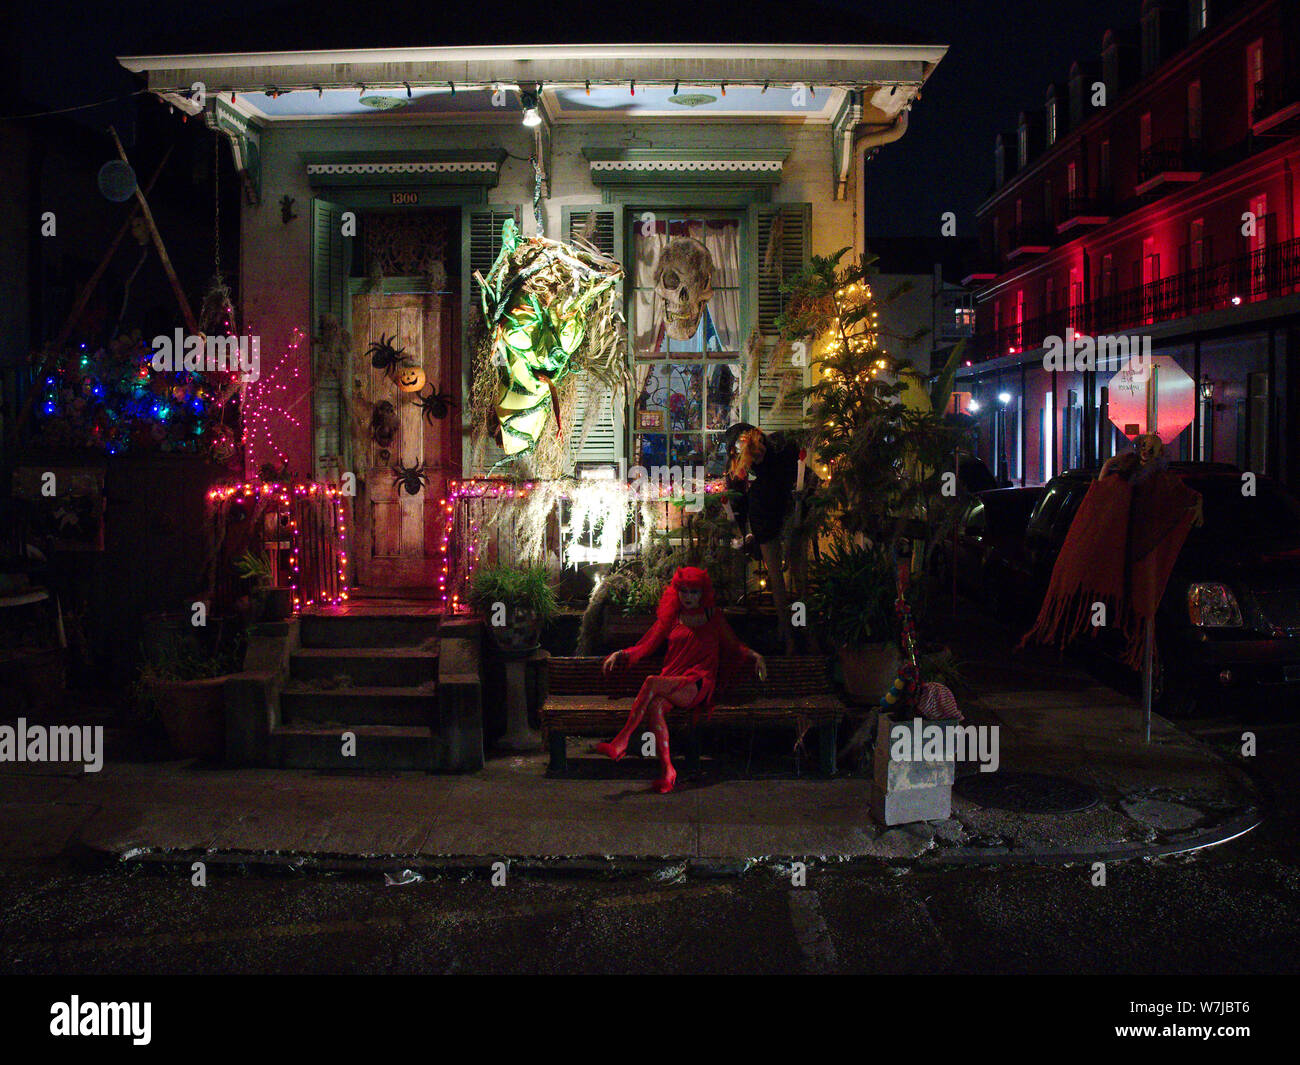 New Orleans, Louisiana, USA - October 31, 2018: A woman wearing a costume sits in front of a decorated house on Halloween night. Stock Photo